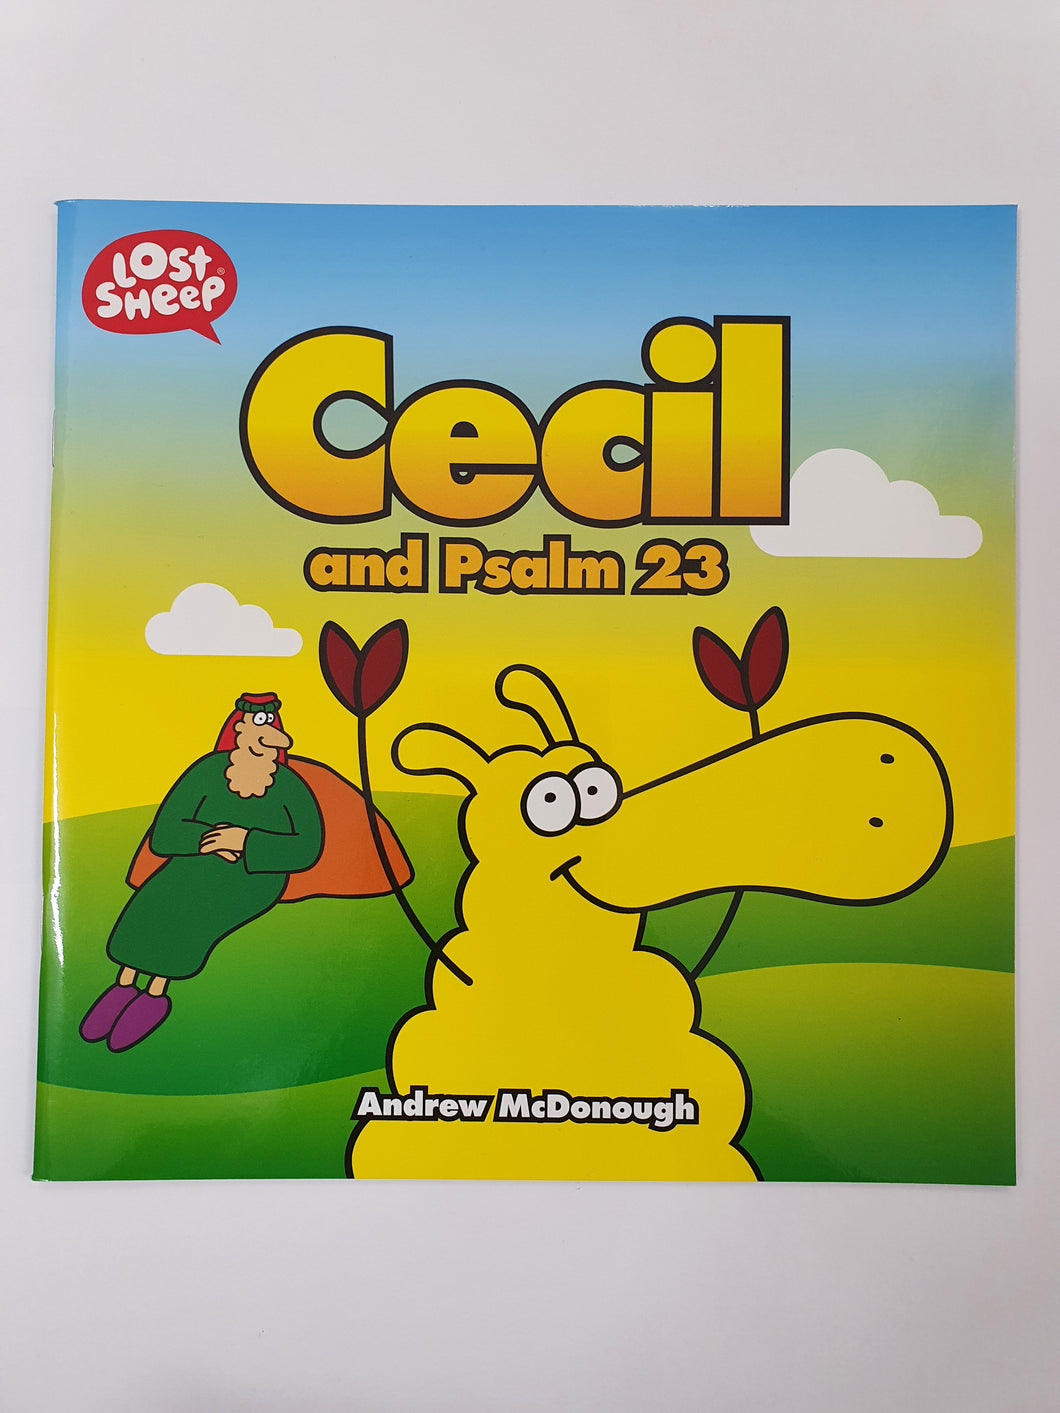 Lost Sheep: Cecil and Psalm 23